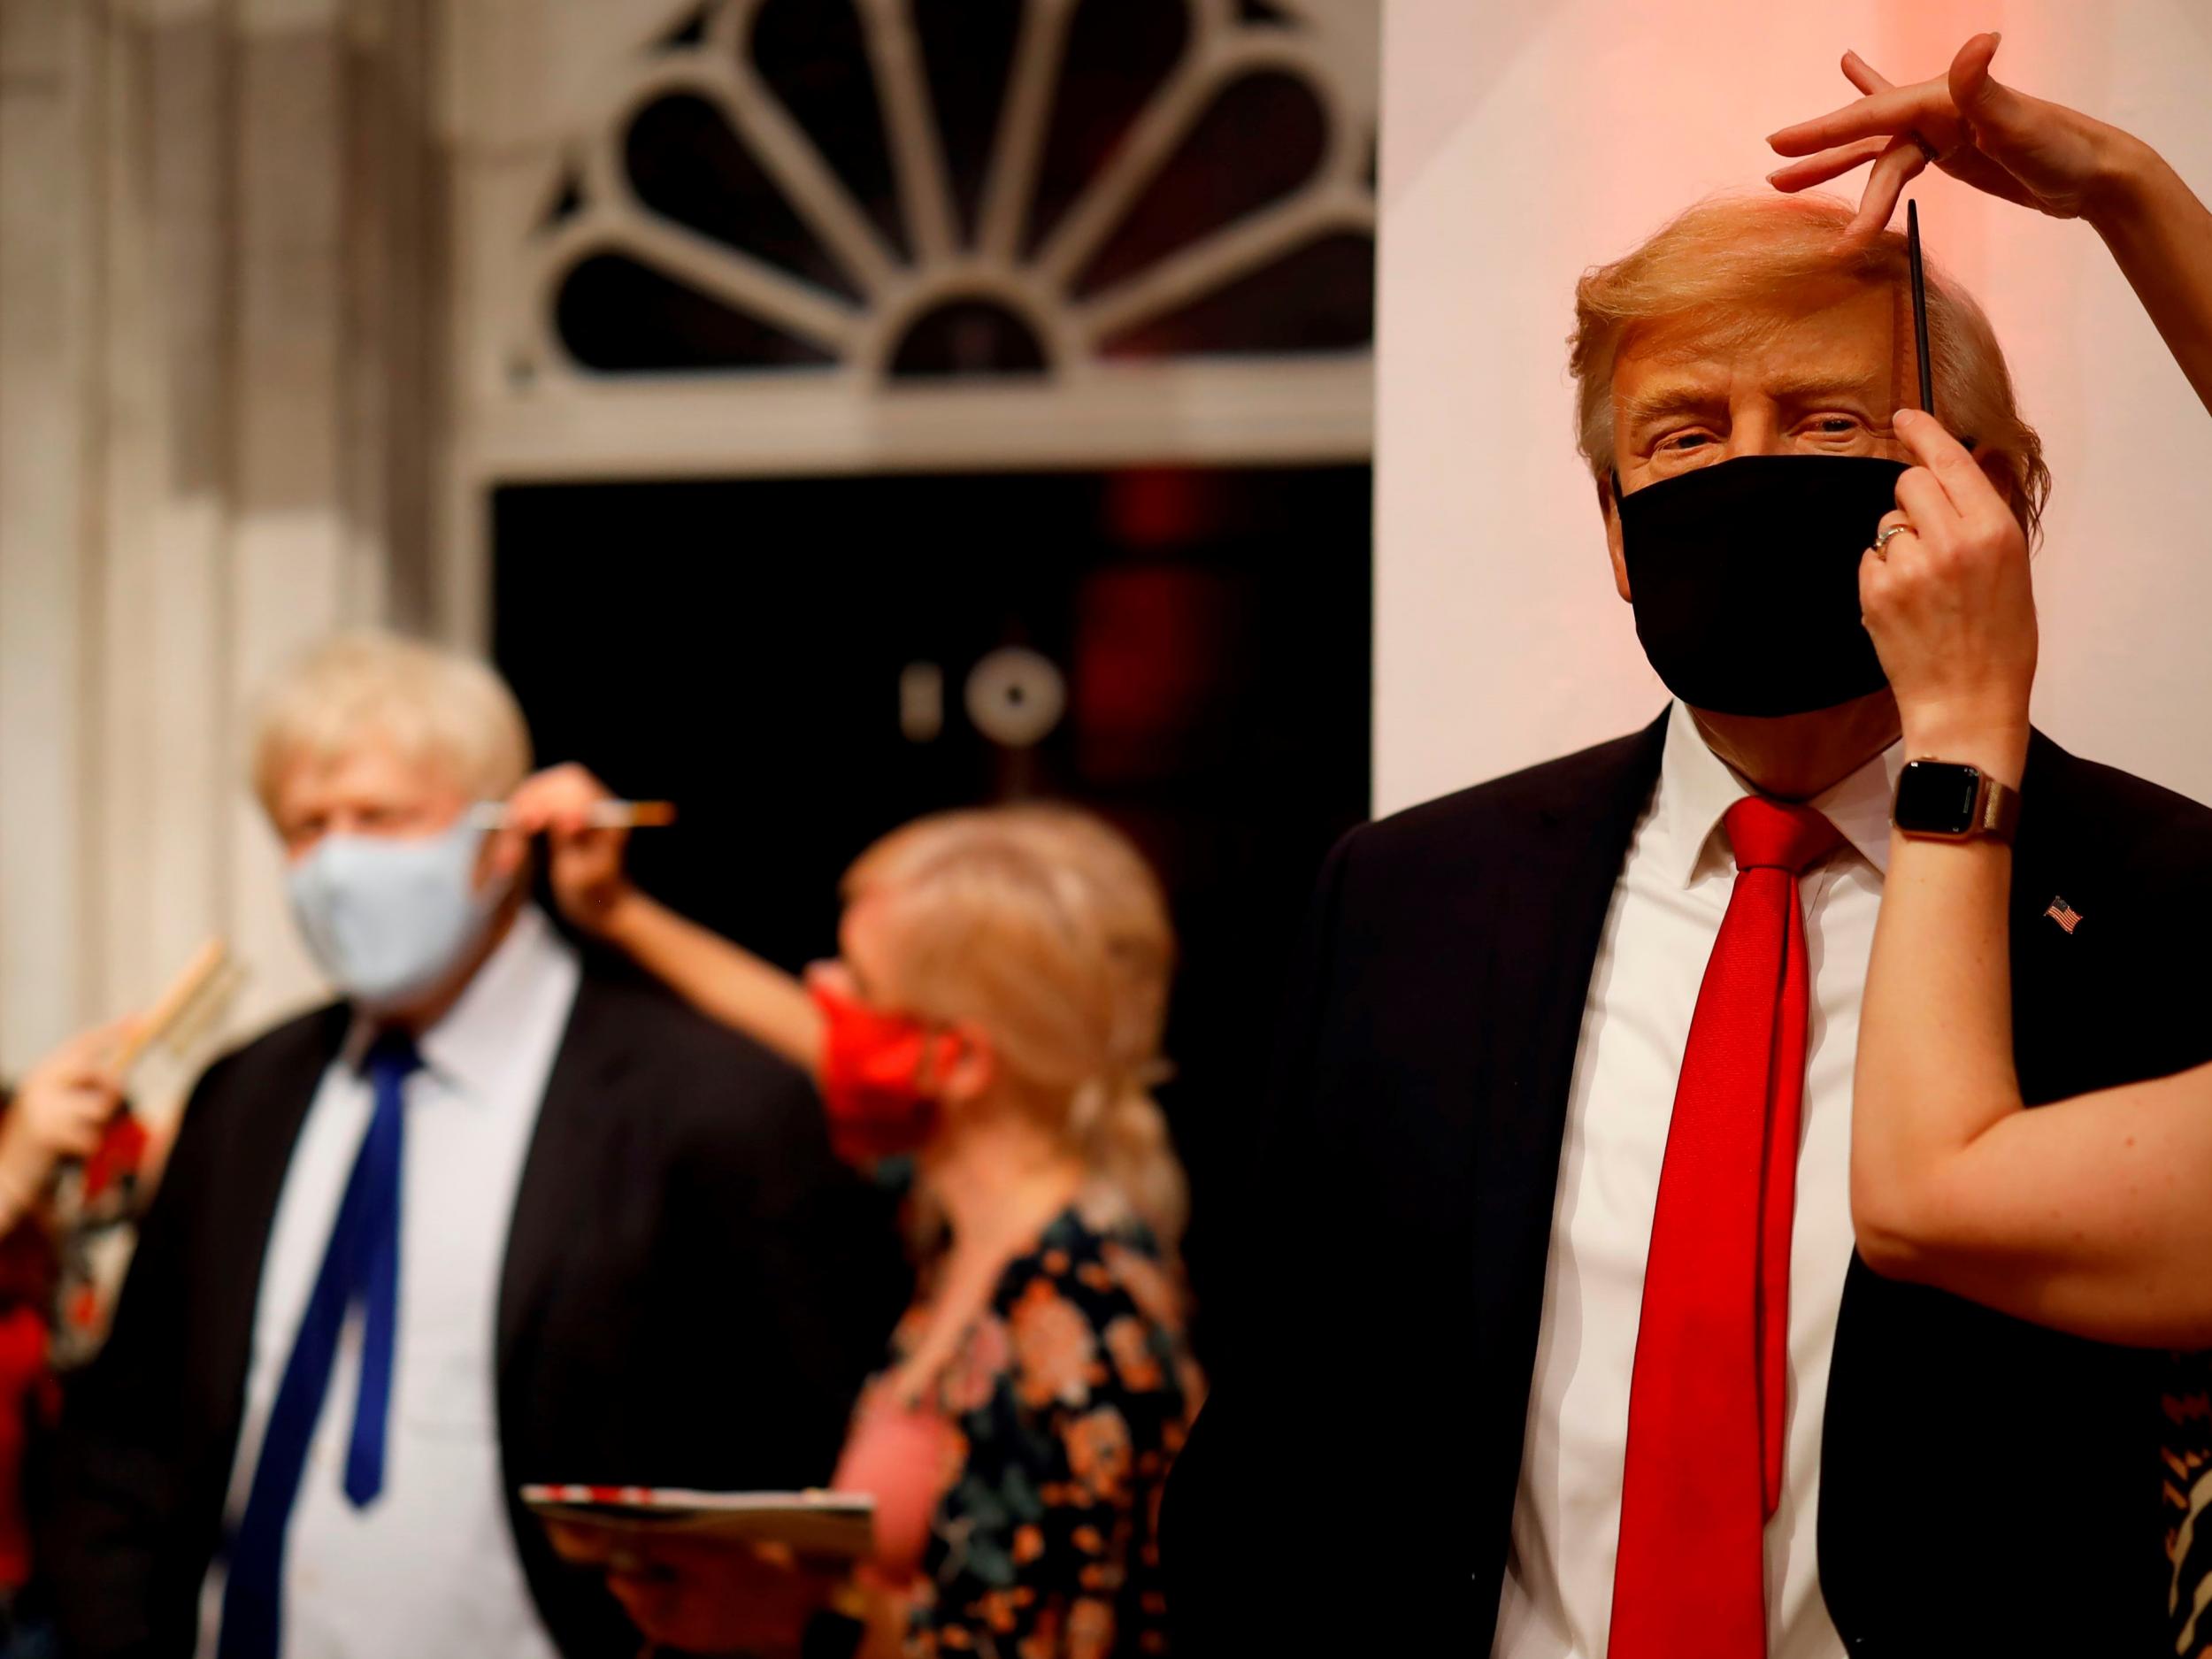 Artists put the finishing touches to wax figures Britain's Prime Minister Boris Johnson and US President Donald Trump at Madame Tussauds on 30 July, 2020. New polls suggest the leaders lack public trust when it comes to handling the pandemic